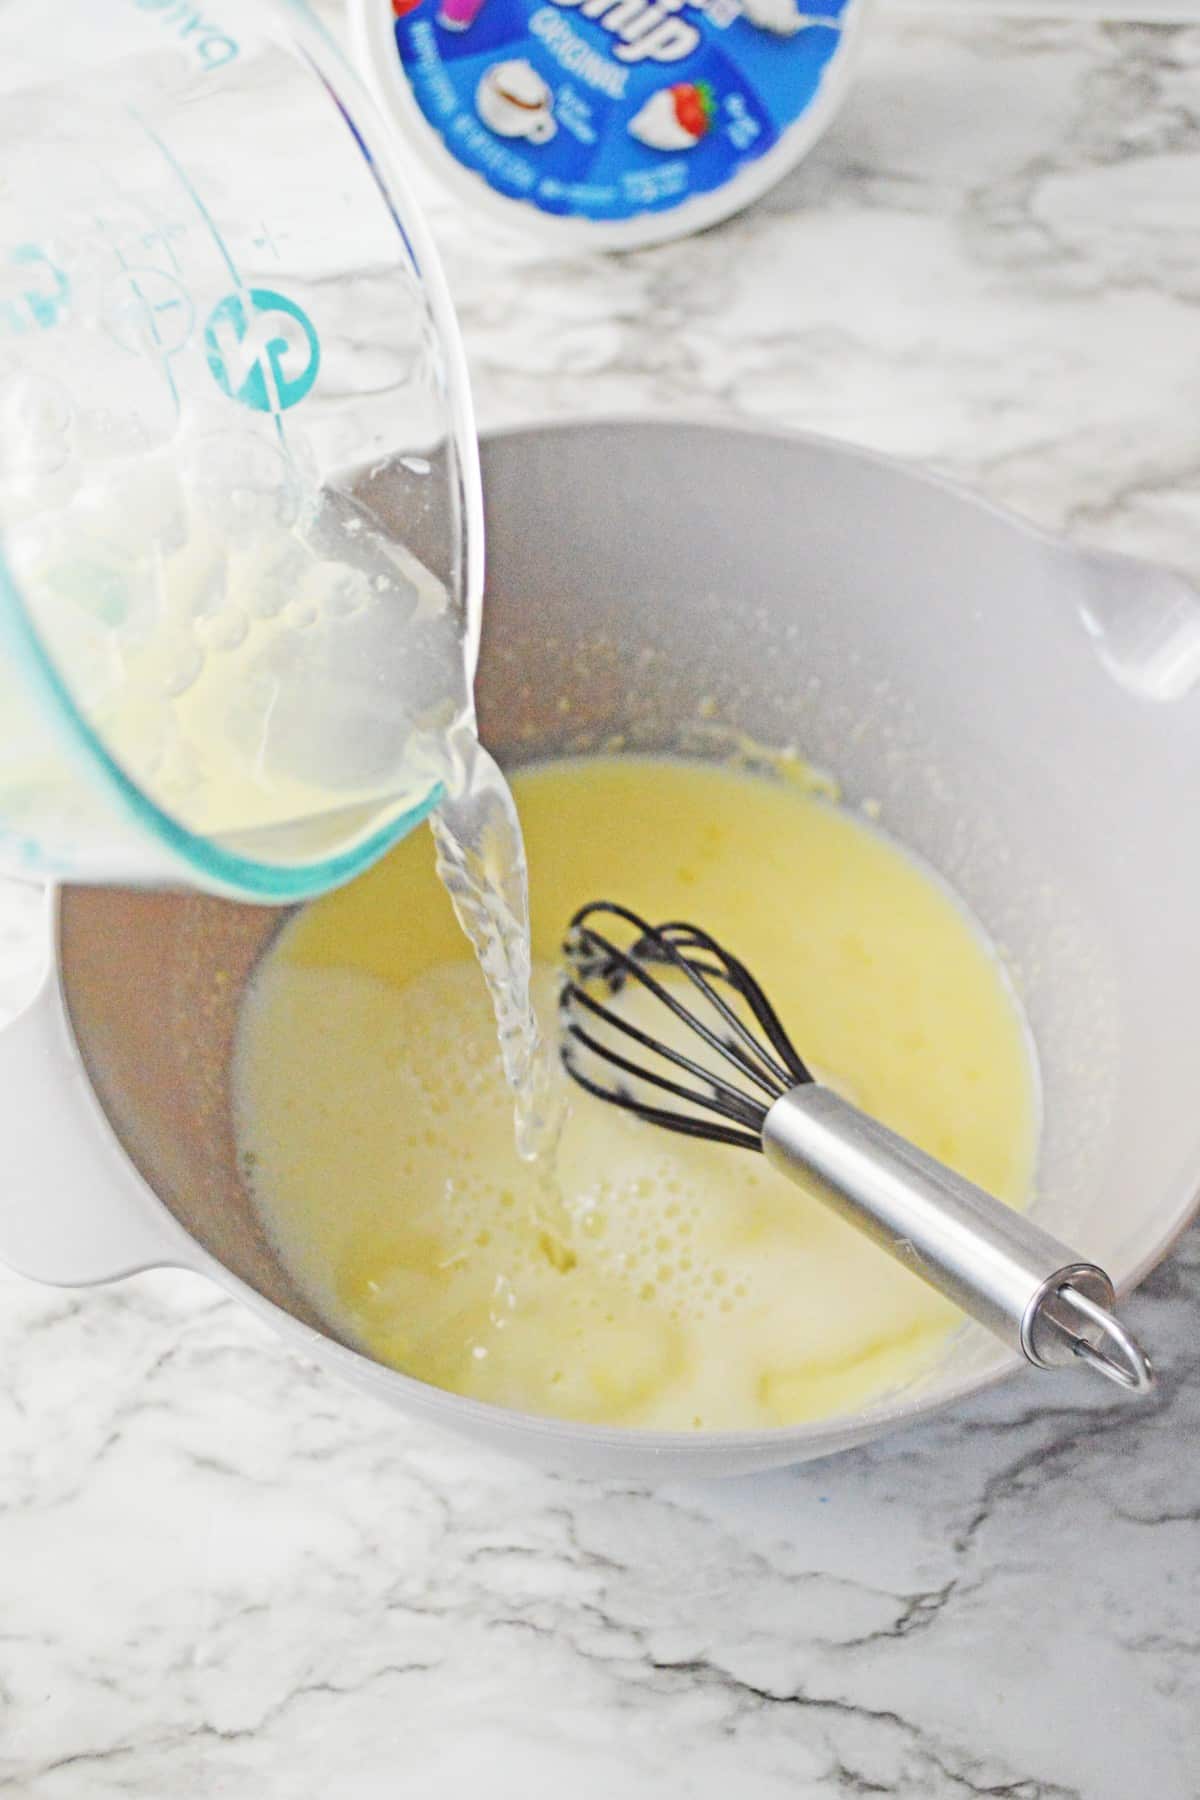 Process of preparing champagne cheesecake shooter is to mix and whisk together cheesecake pudding mix, milk, and champagne, stirring until well combined.